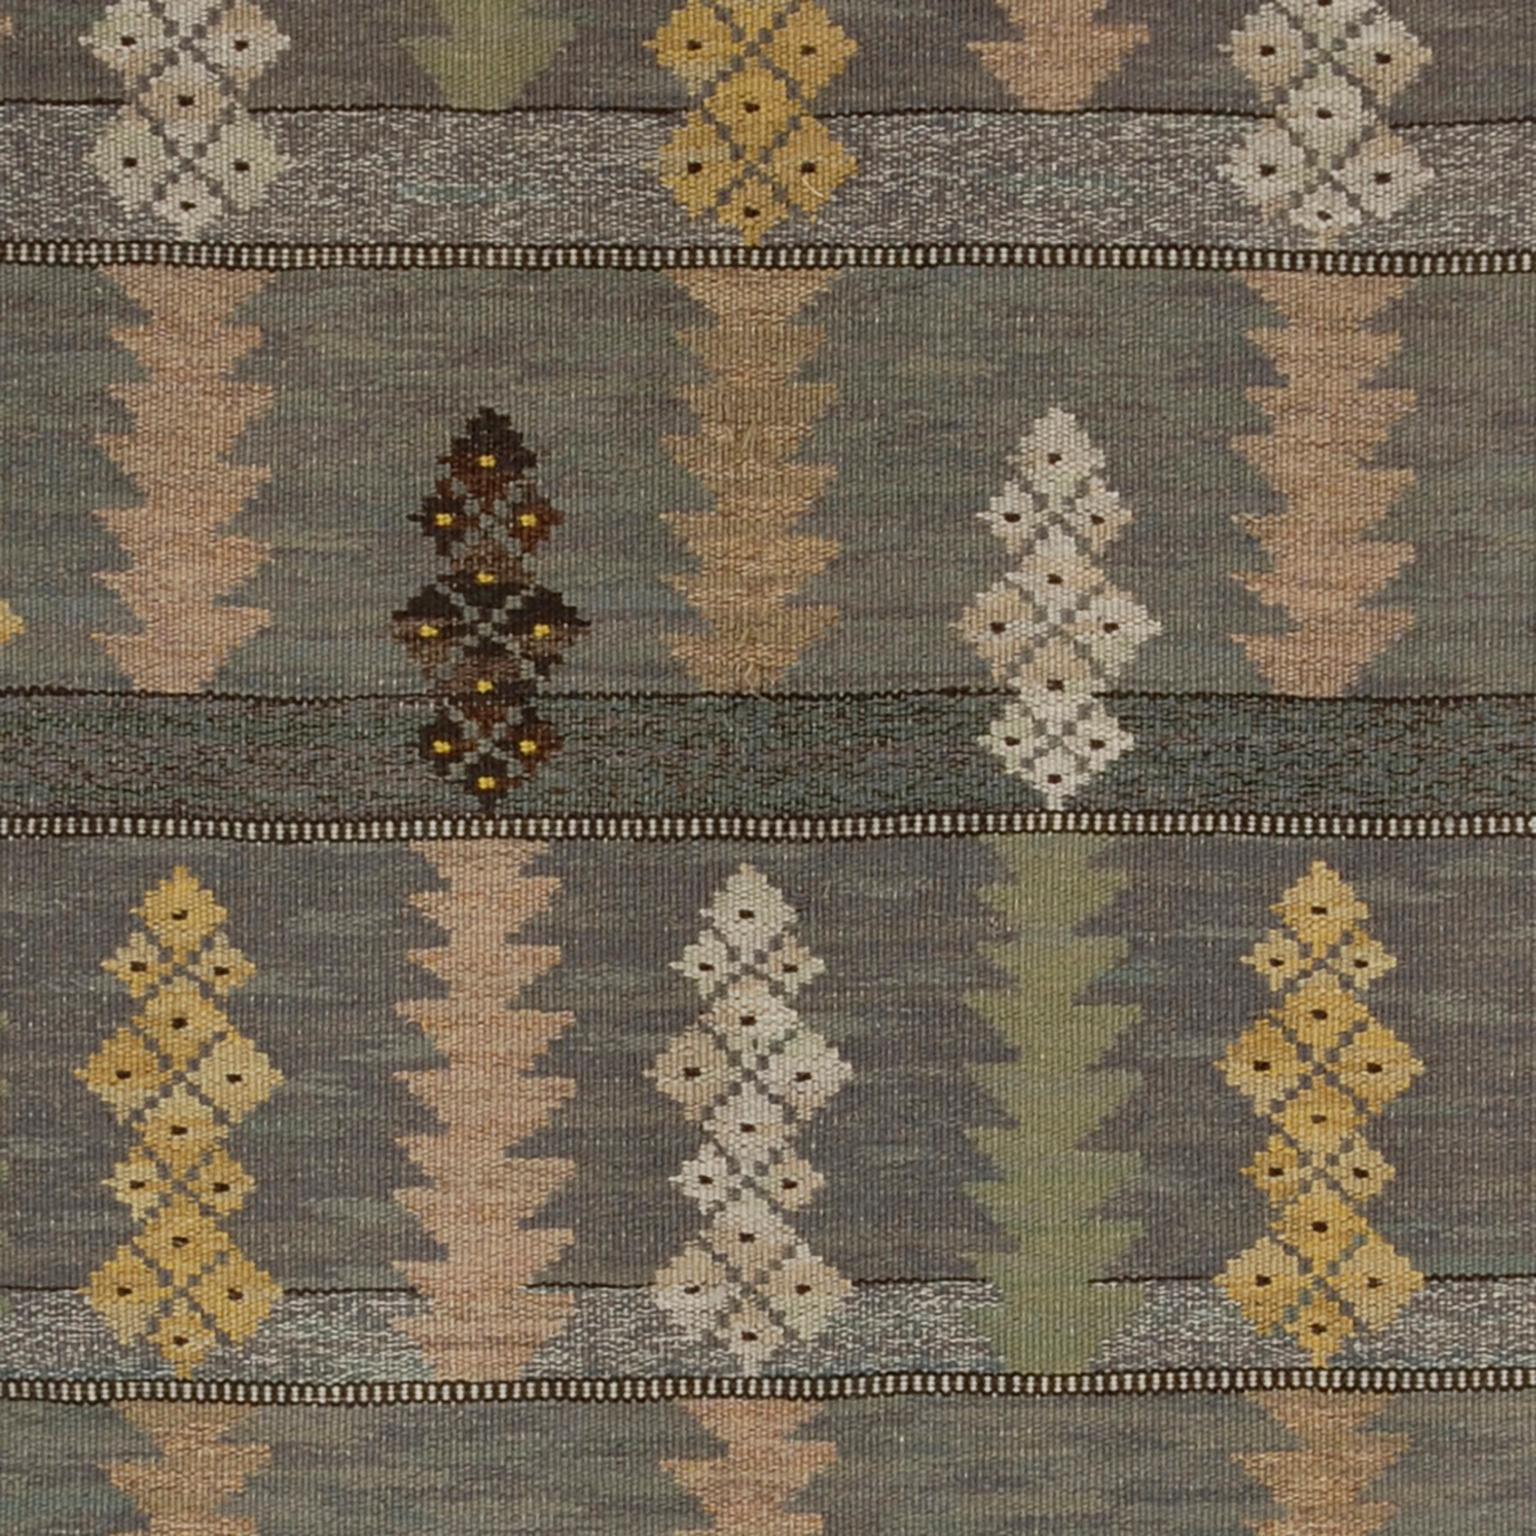 Hand-Woven Mid-20th Century Swedish Wall Hanging by Märta Måås-Fjetterström For Sale